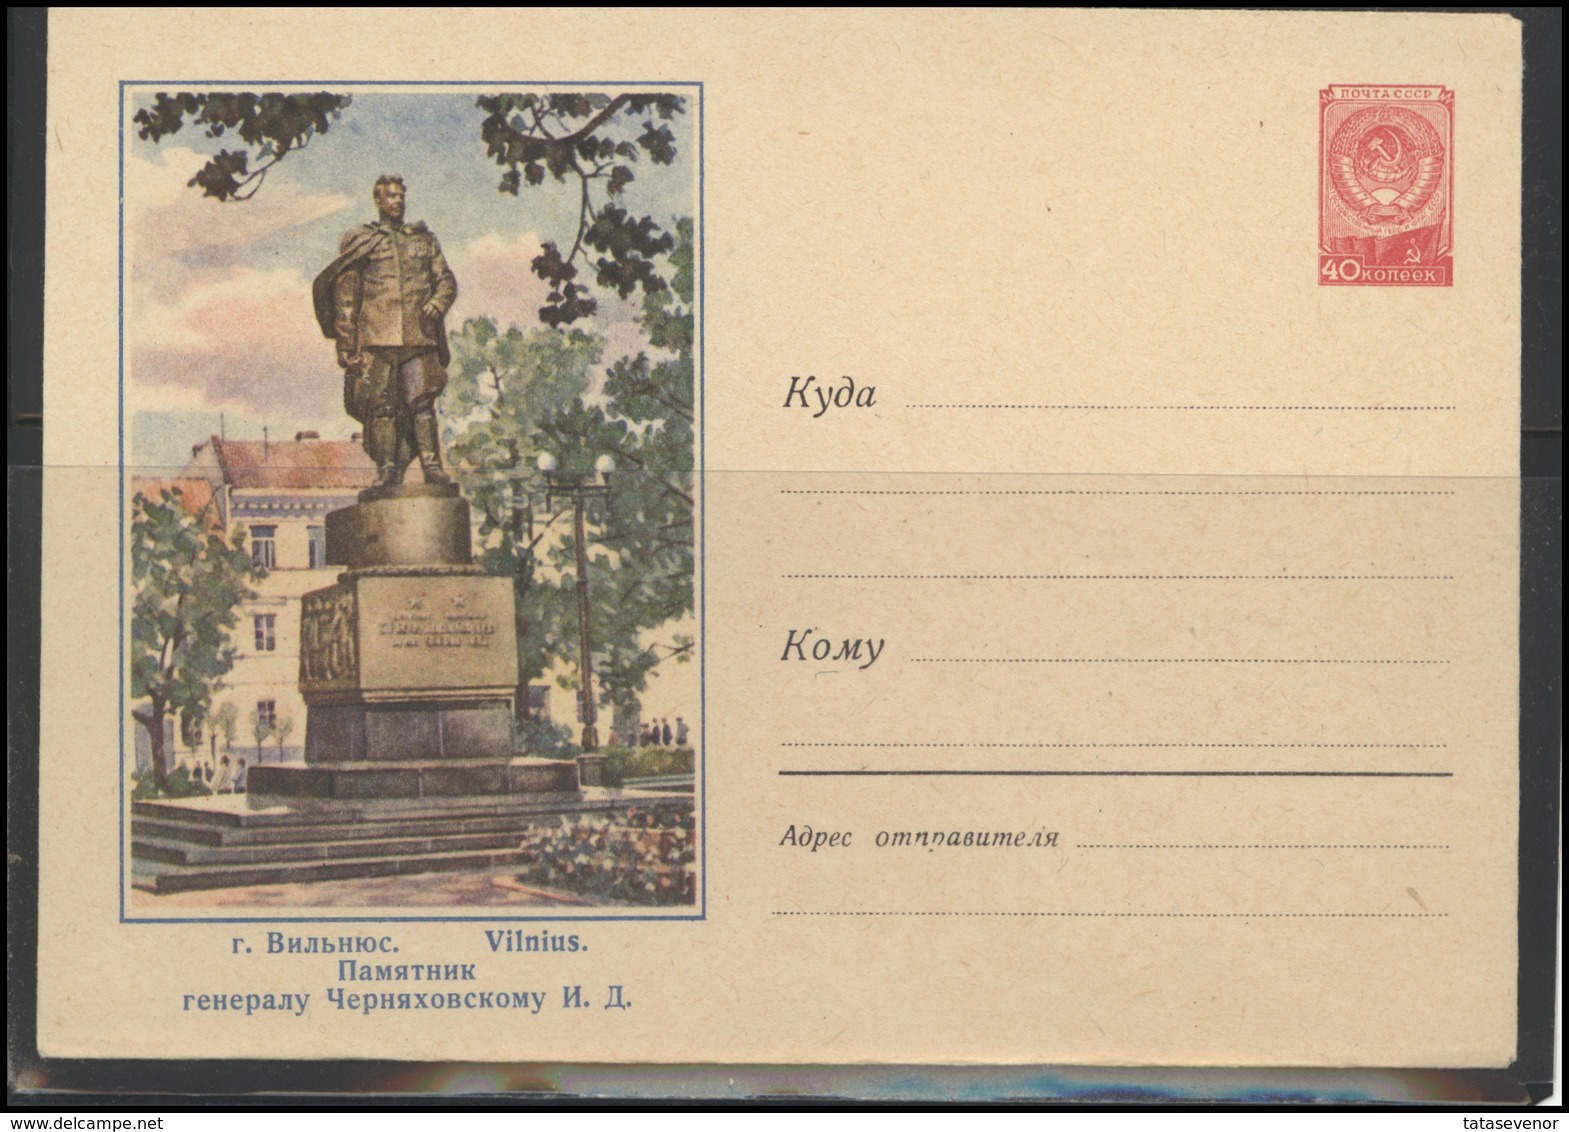 RUSSIA USSR Stamped Stationery Ganzsache 697 1958.05.20 LITHUANIA Vilnius Tcherniakhovsky Monument (now Dismounted) - 1950-59